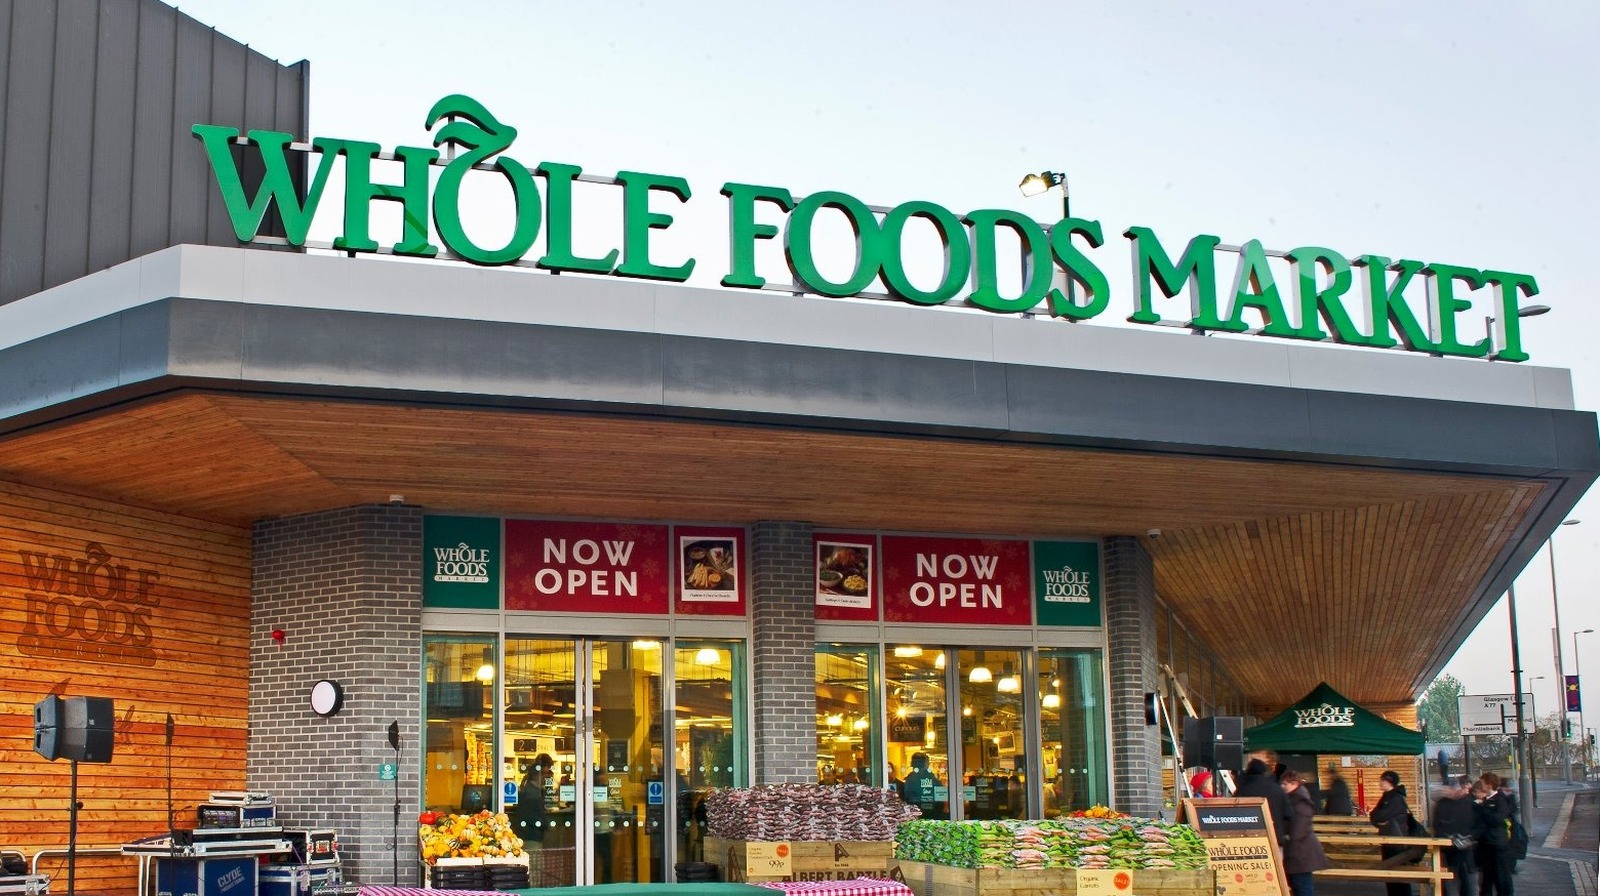 Find 365 by Whole Foods Market Products